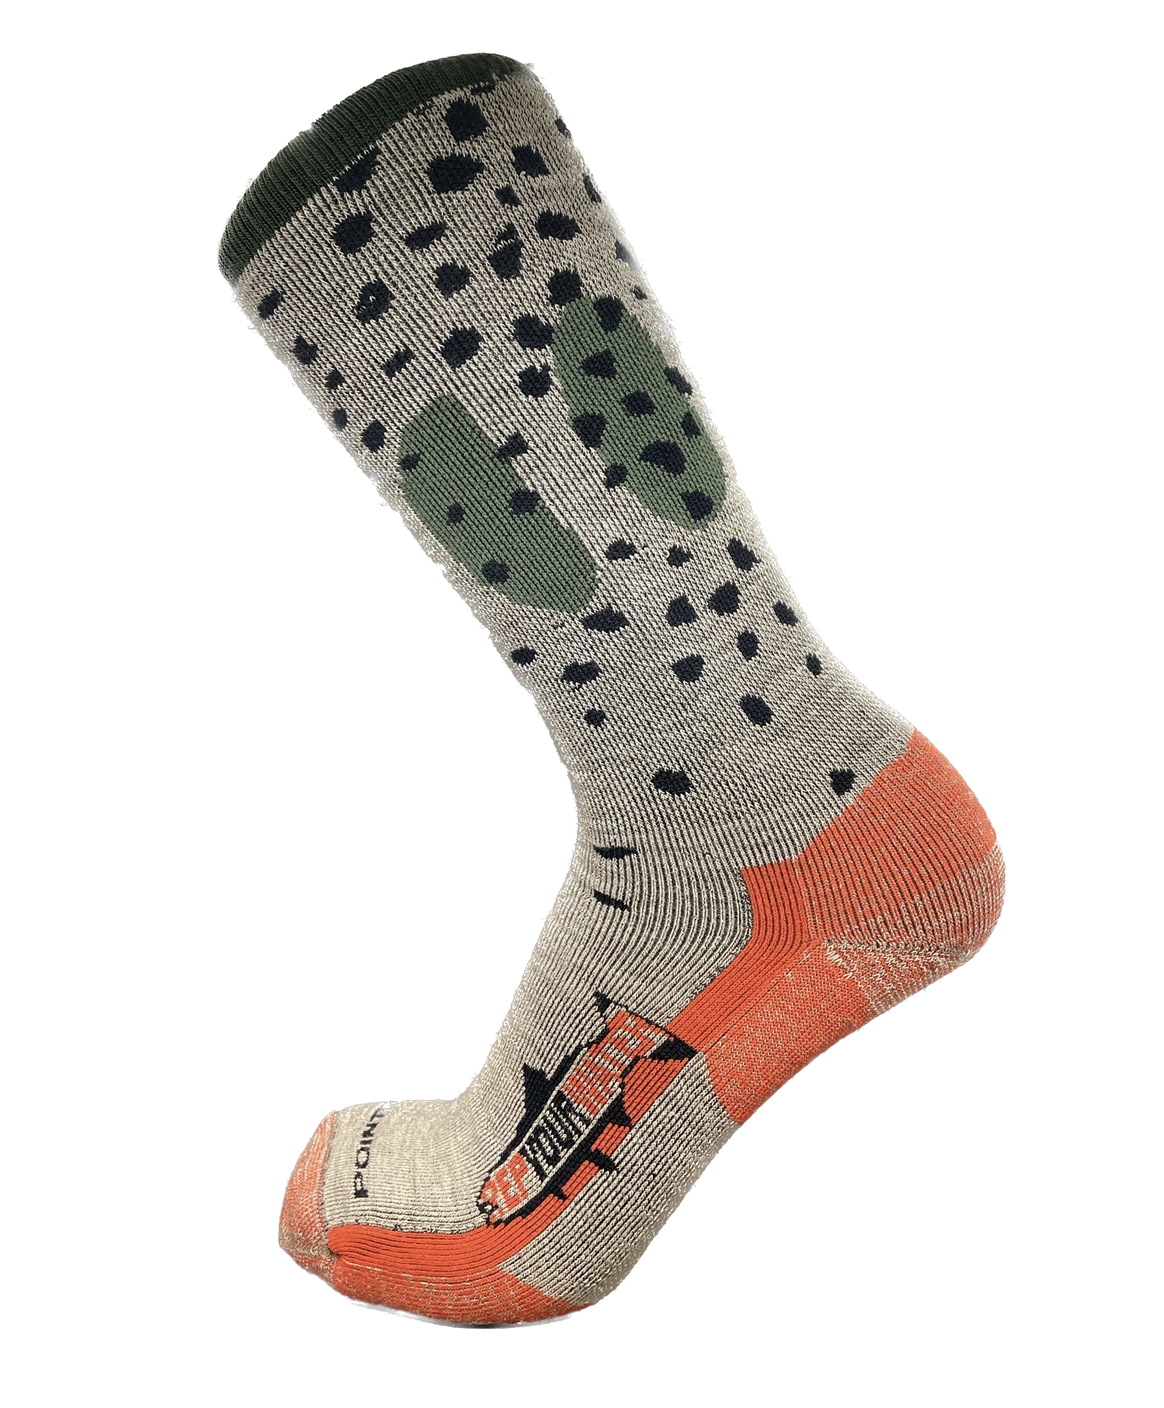 Rep Your Water Trout Socks | Cutthroat Trout